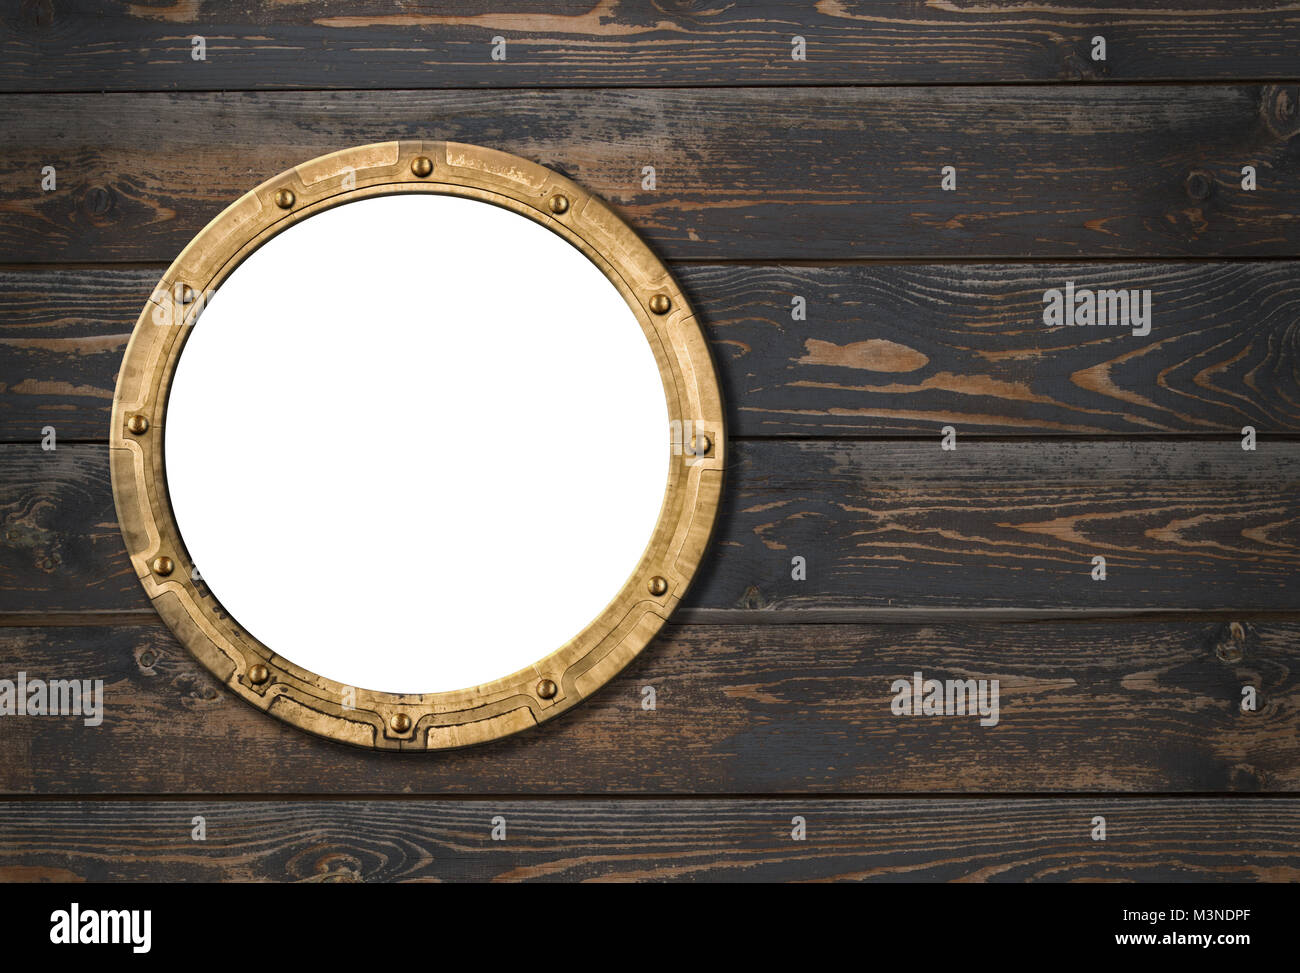 ship or boat porthole frame on wooden wall 3d illustration Stock Photo